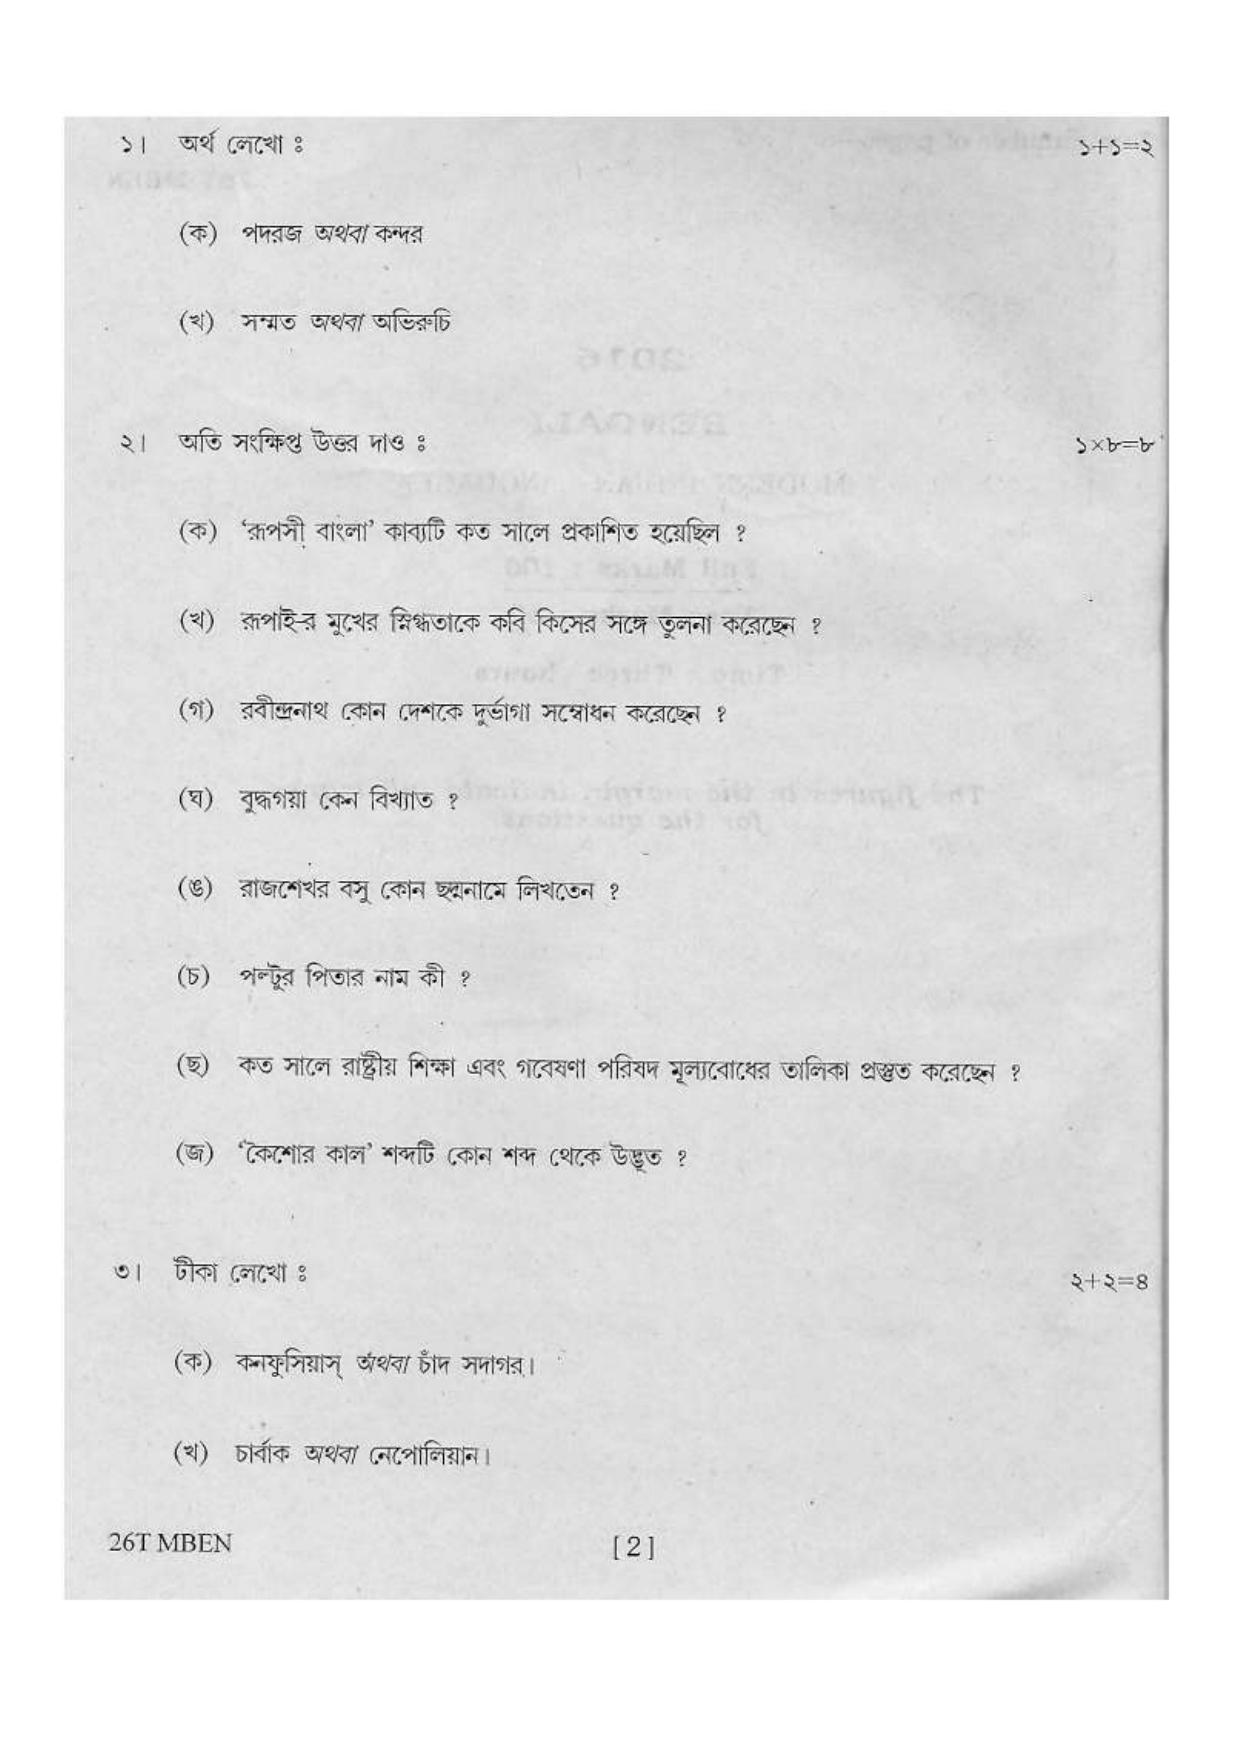 Assam HS 2nd Year Bengali MIL 2016 Question Paper - Page 2